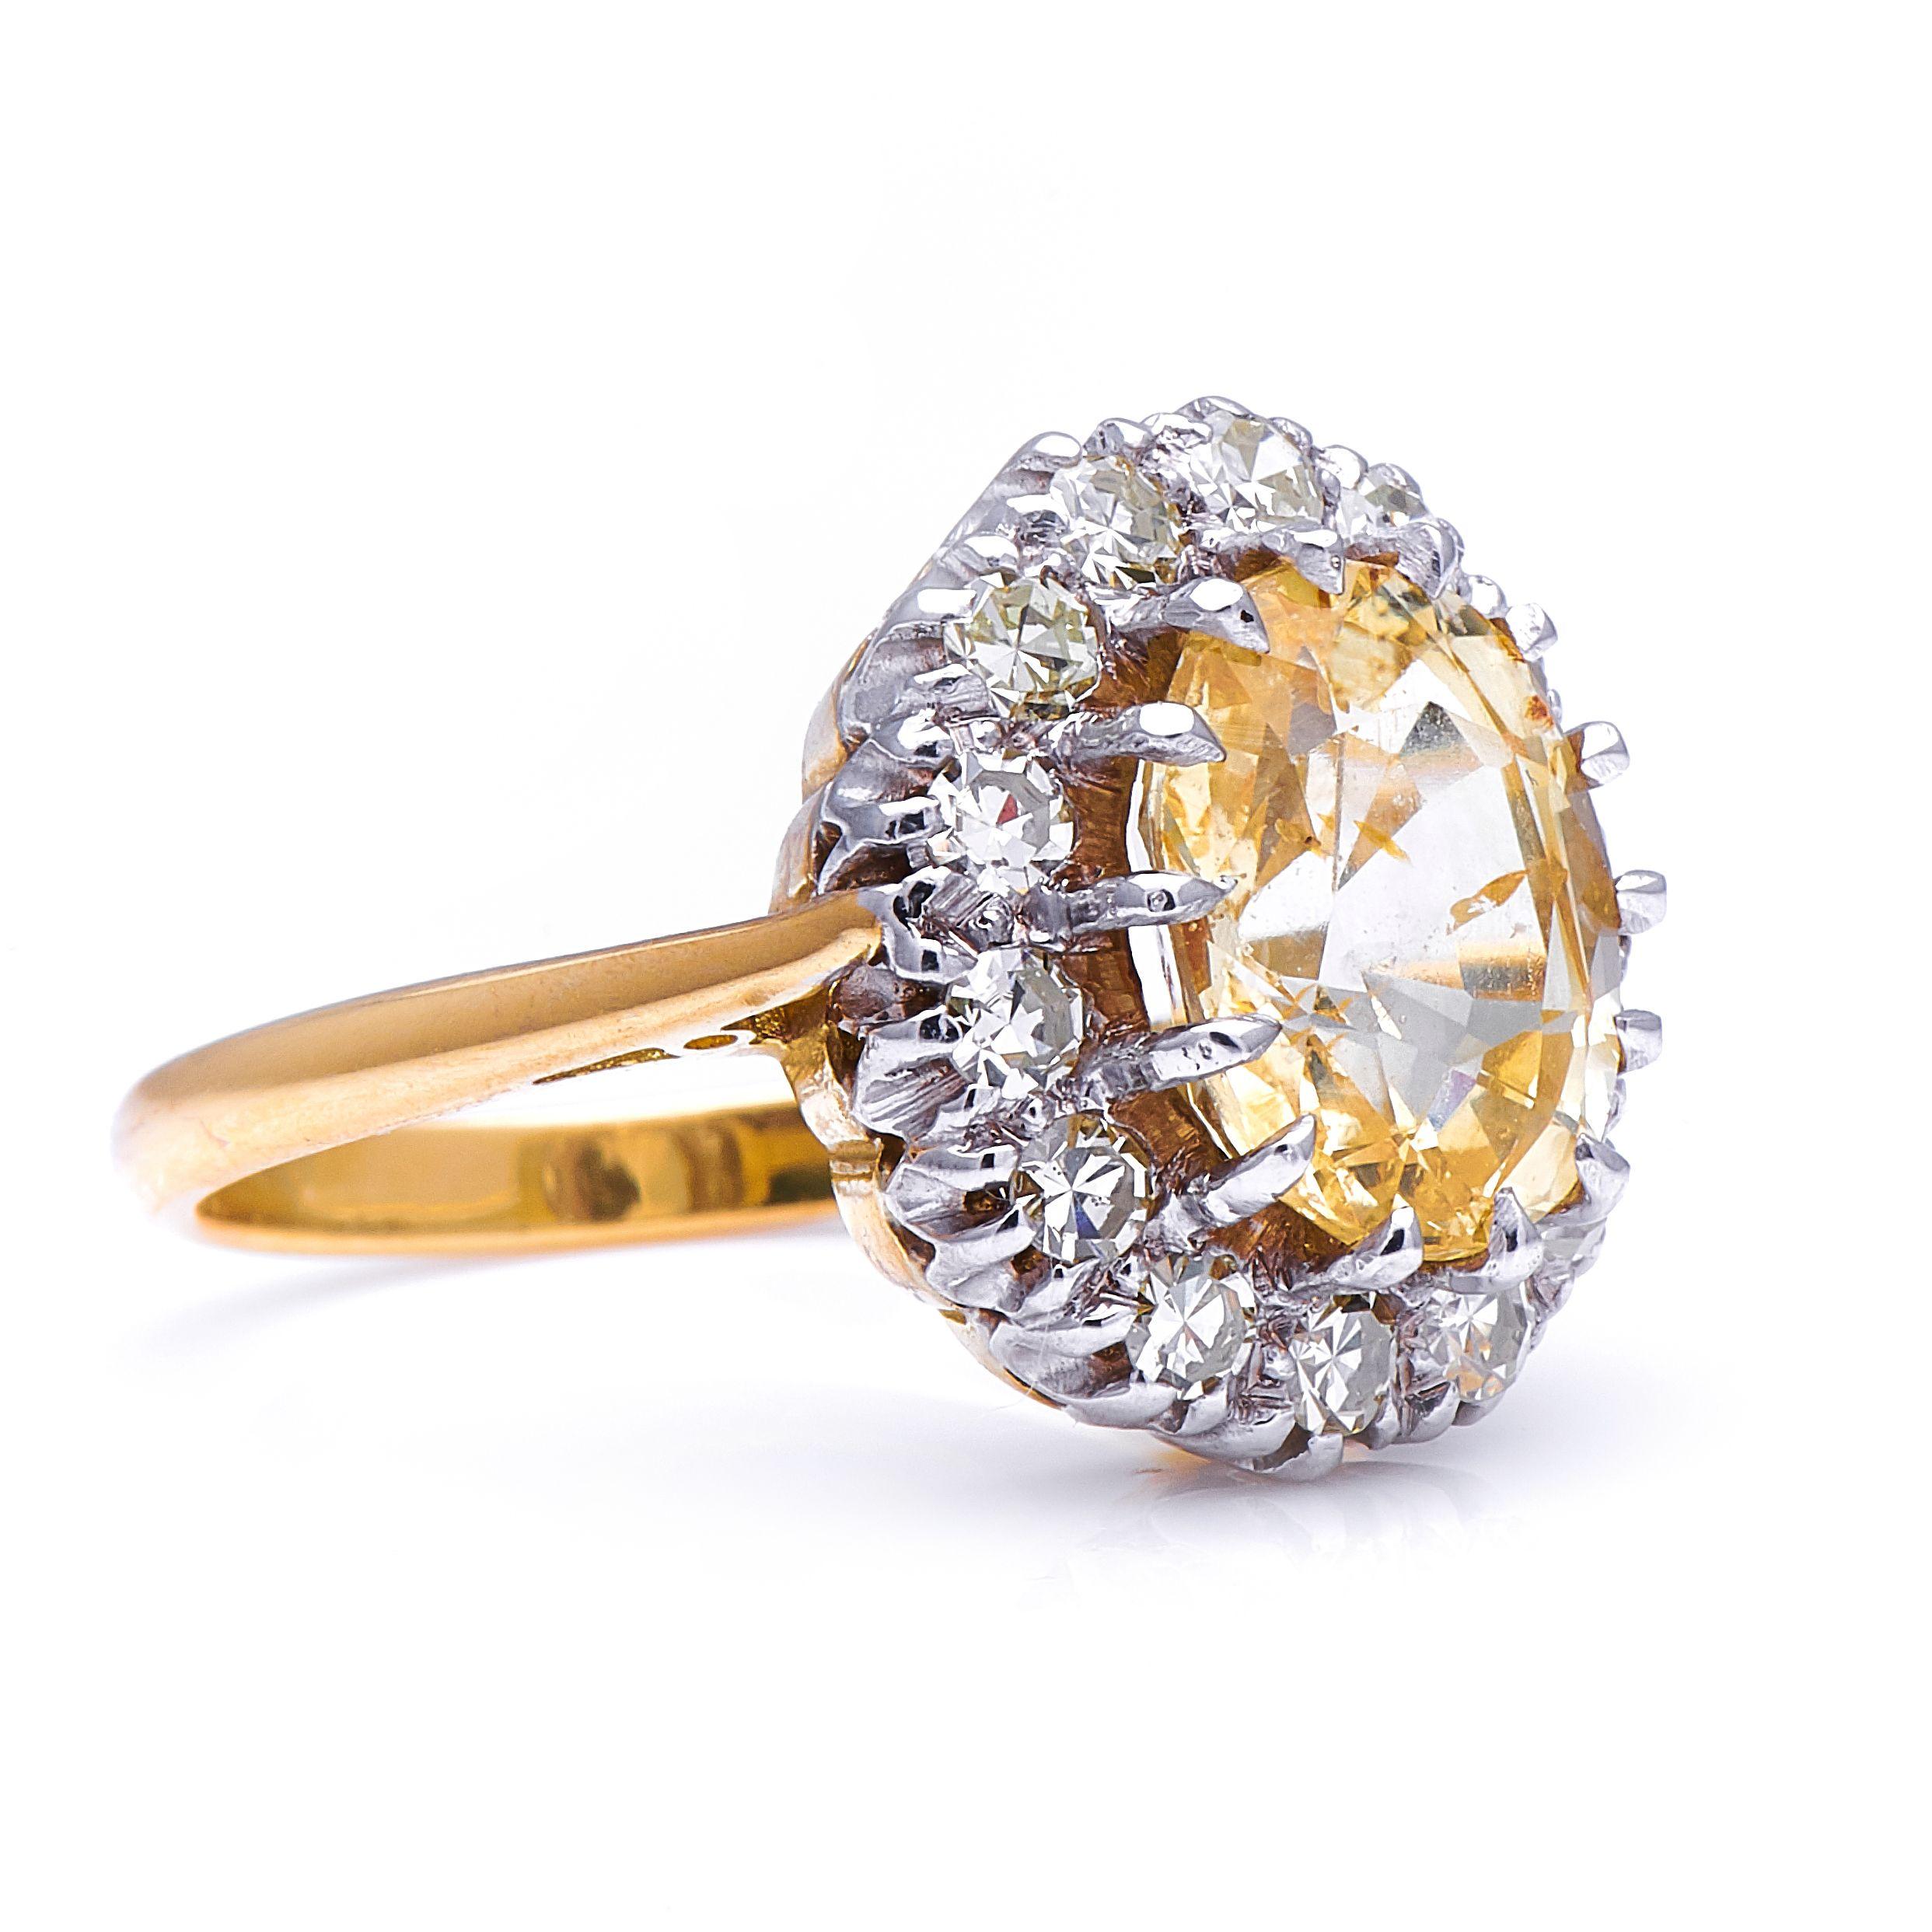 Yellow sapphire and diamond ring, circa 1950. Yellow sapphires owe their colour to trace elements of iron, and can often be found alongside blue sapphires, sometimes with the two colours appearing in different zones within the same crystal. This